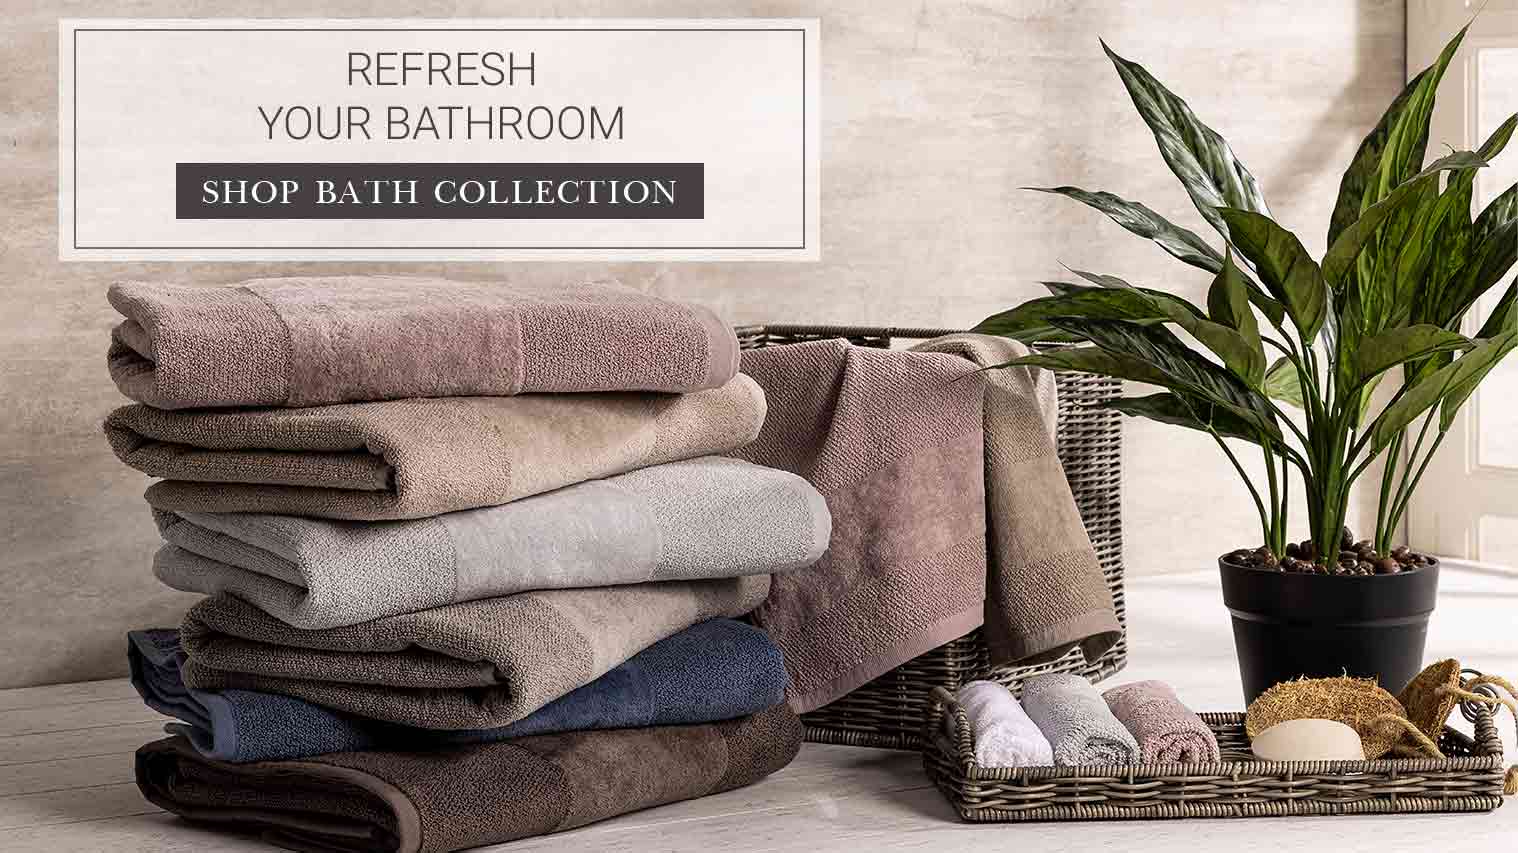 100% cotton Towels for Bath Collection